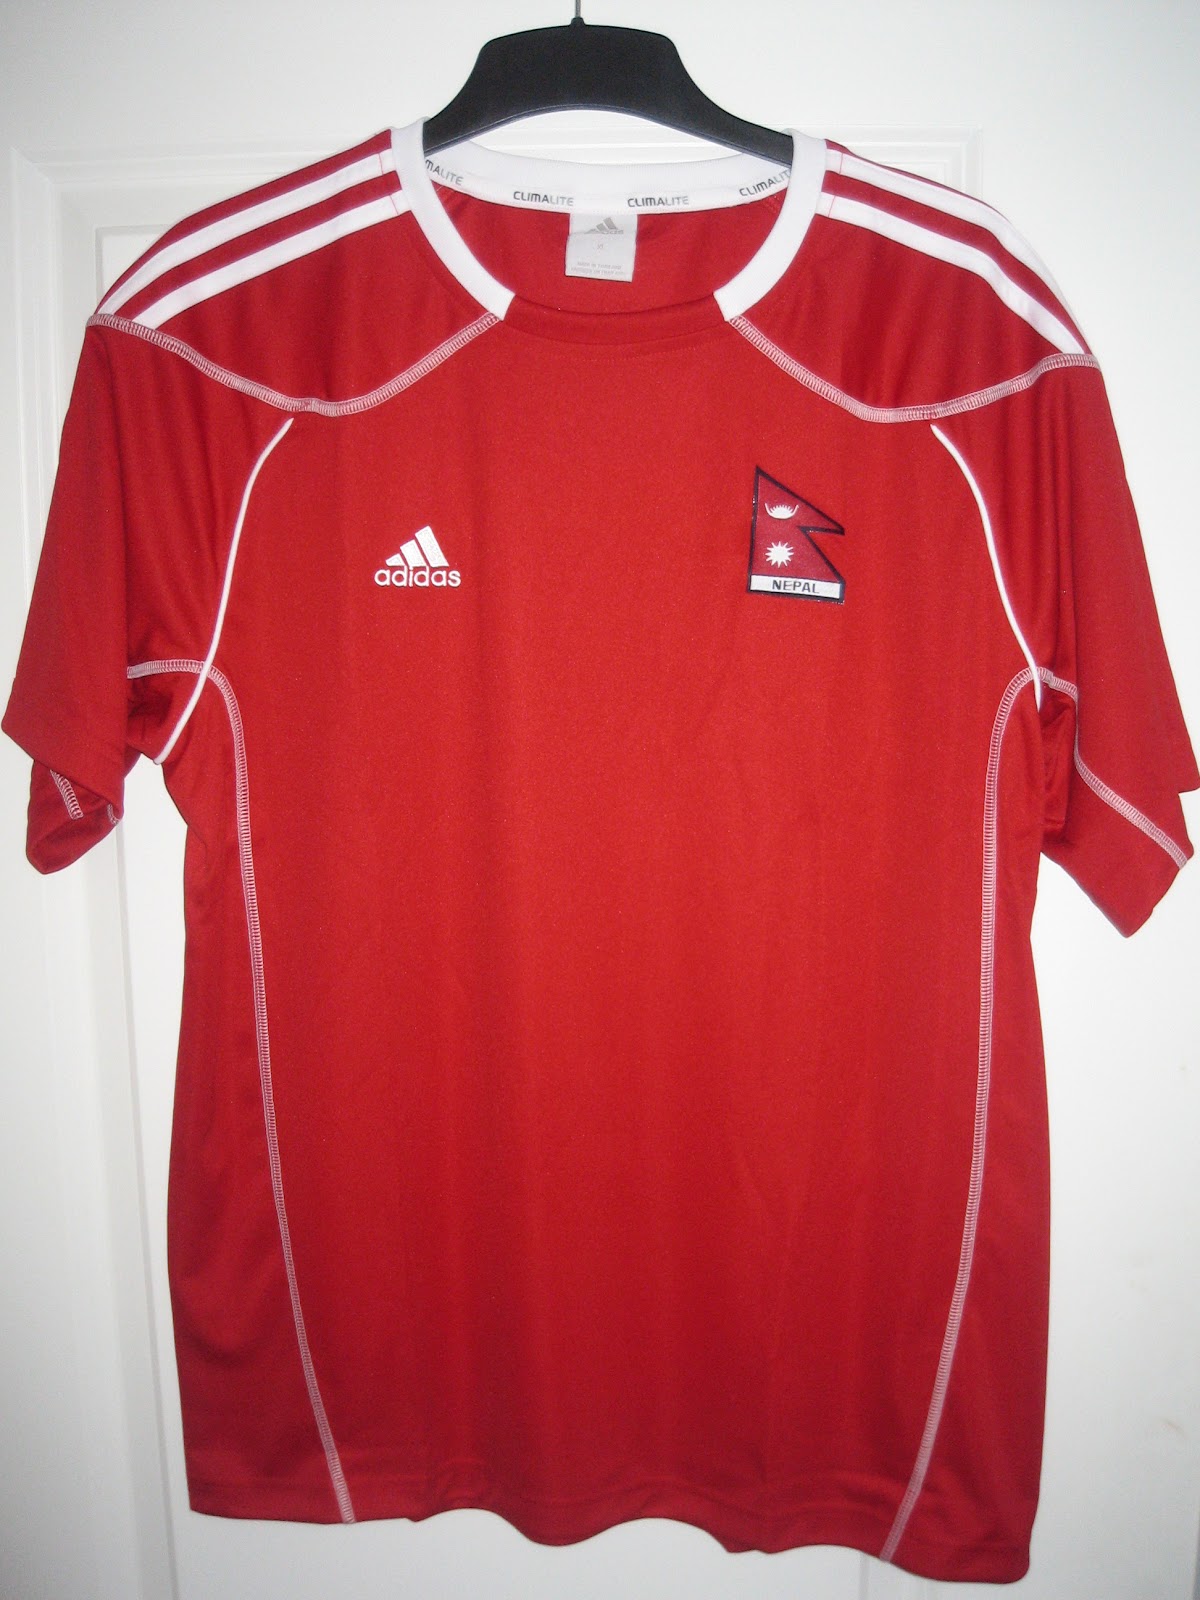 My collection of football shirts: Nepal Home and Away 2012